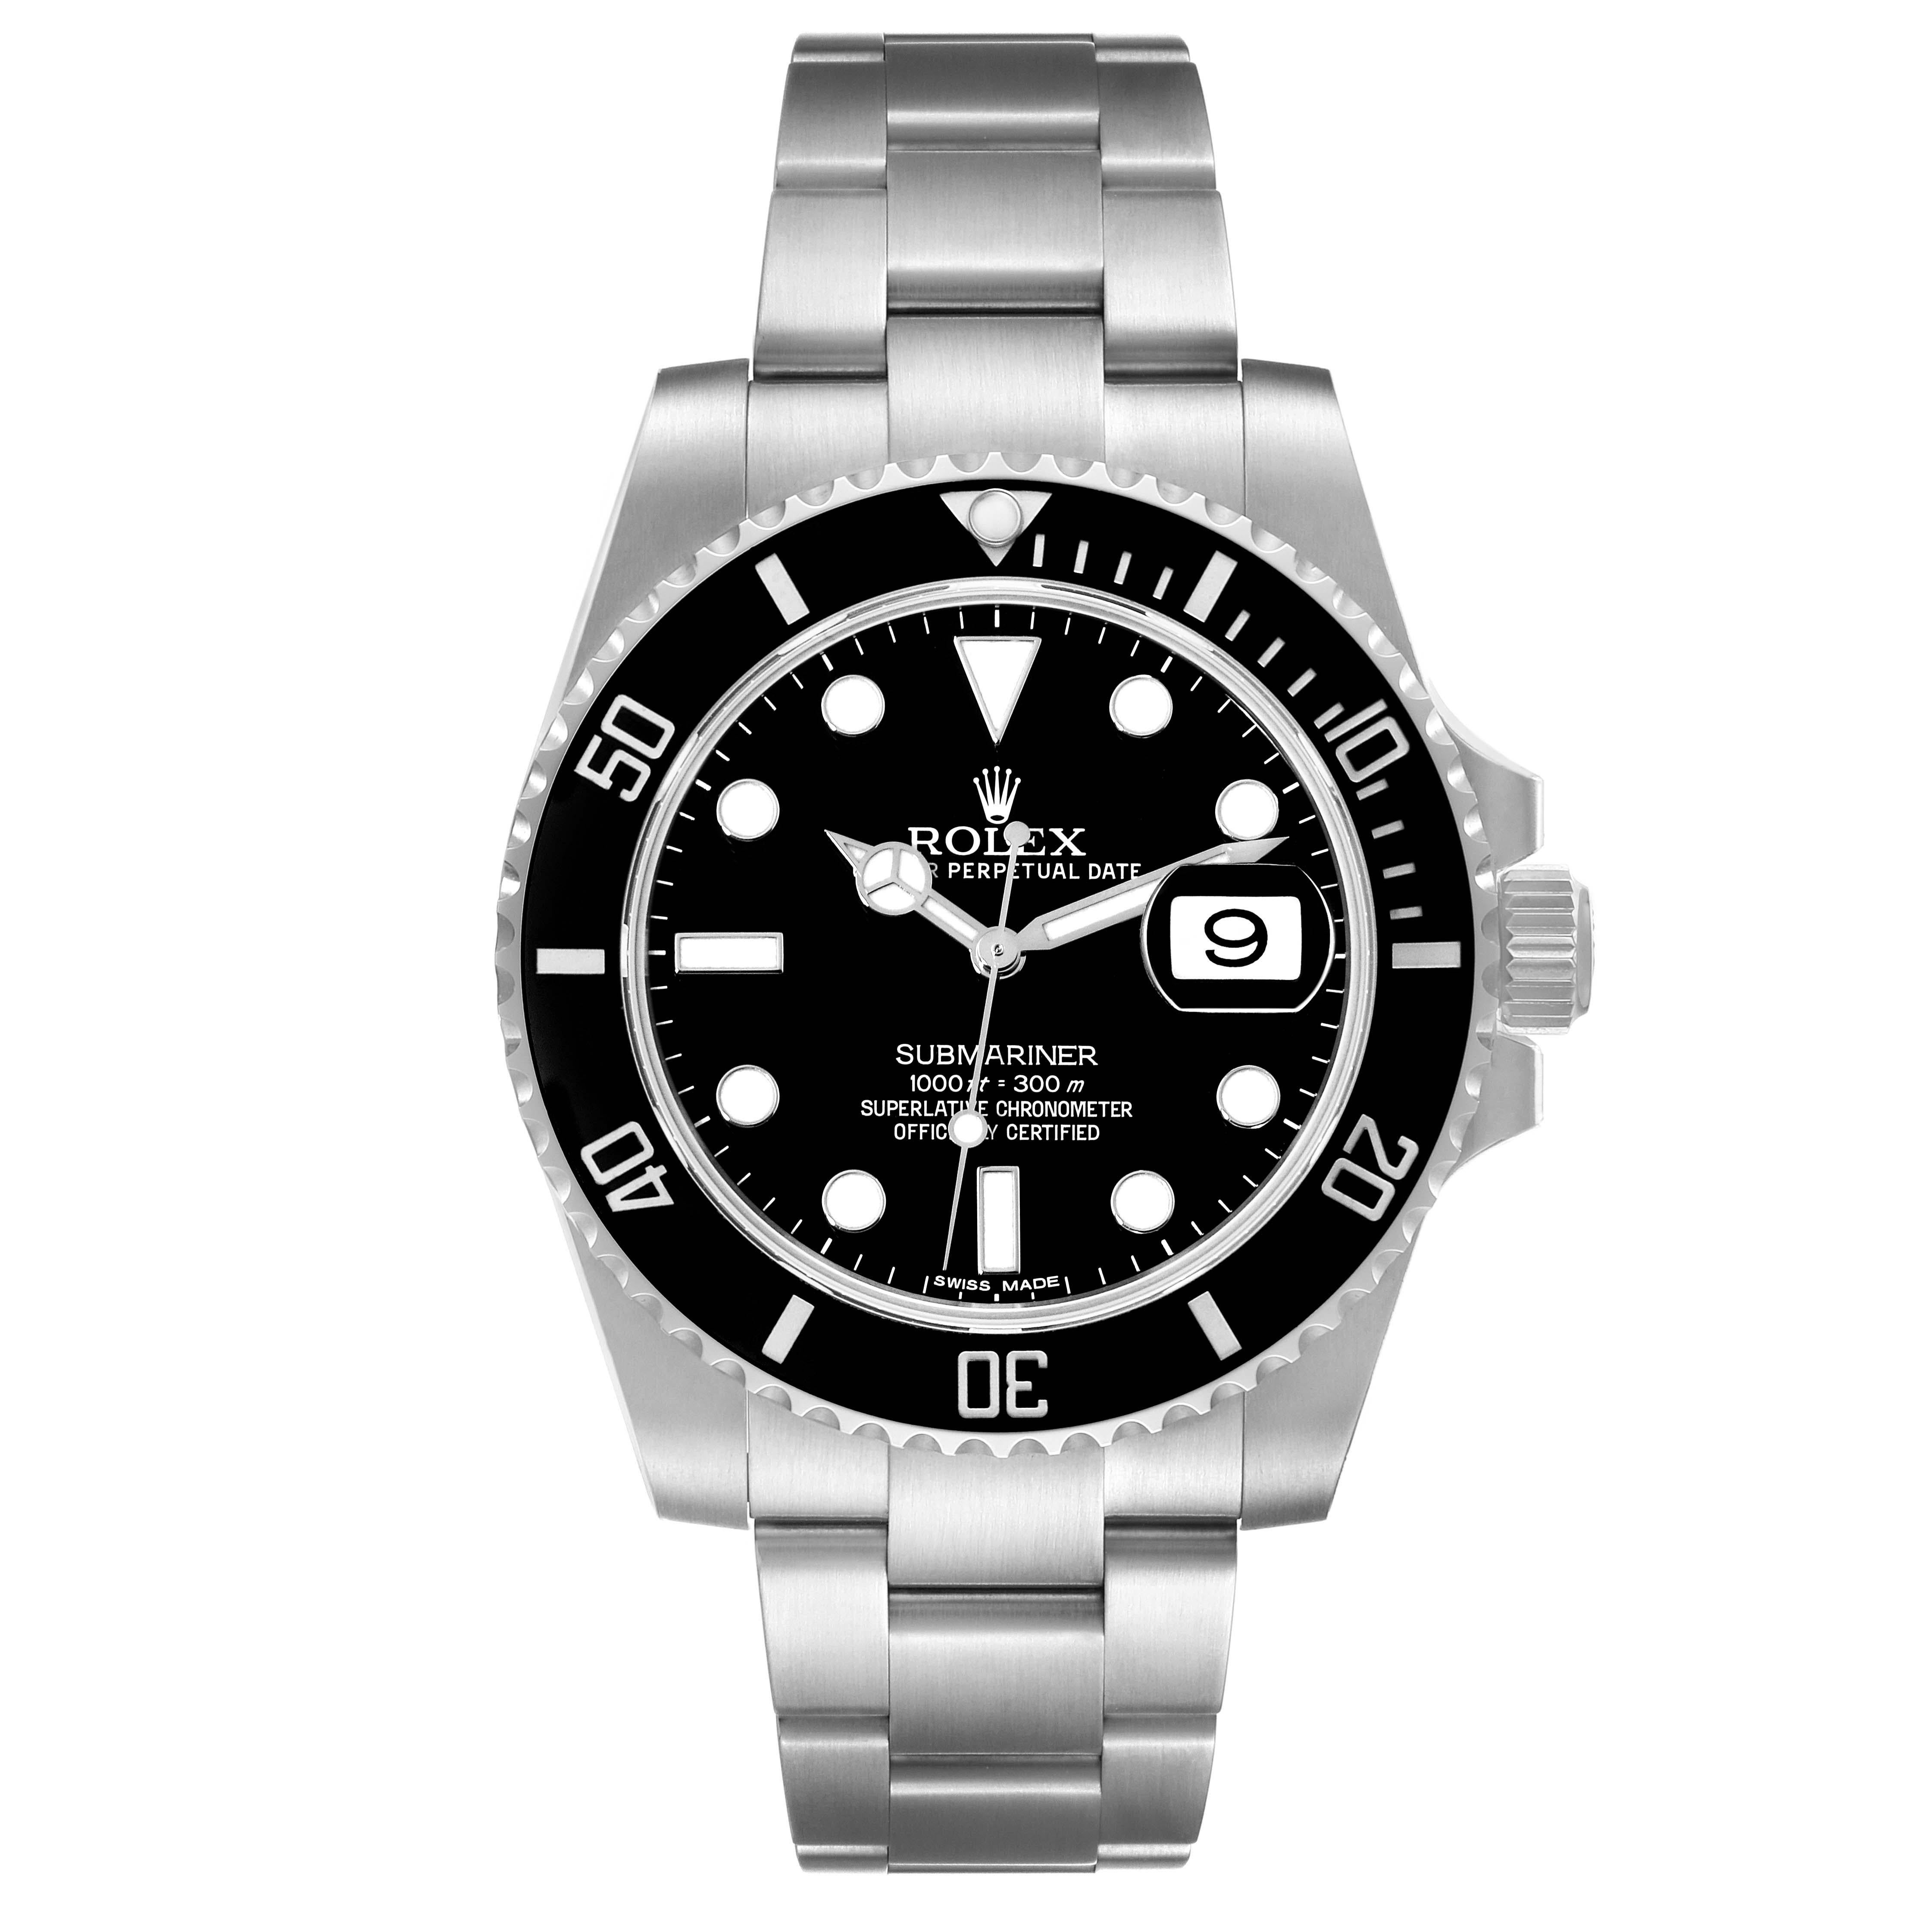 Rolex Submariner Date Black Dial Steel Mens Watch 116610 Box Card. Officially certified chronometer automatic self-winding movement. Stainless steel case 40 mm in diameter. Rolex logo on the crown. Unidirectional rotating black ceramic bezel with 60